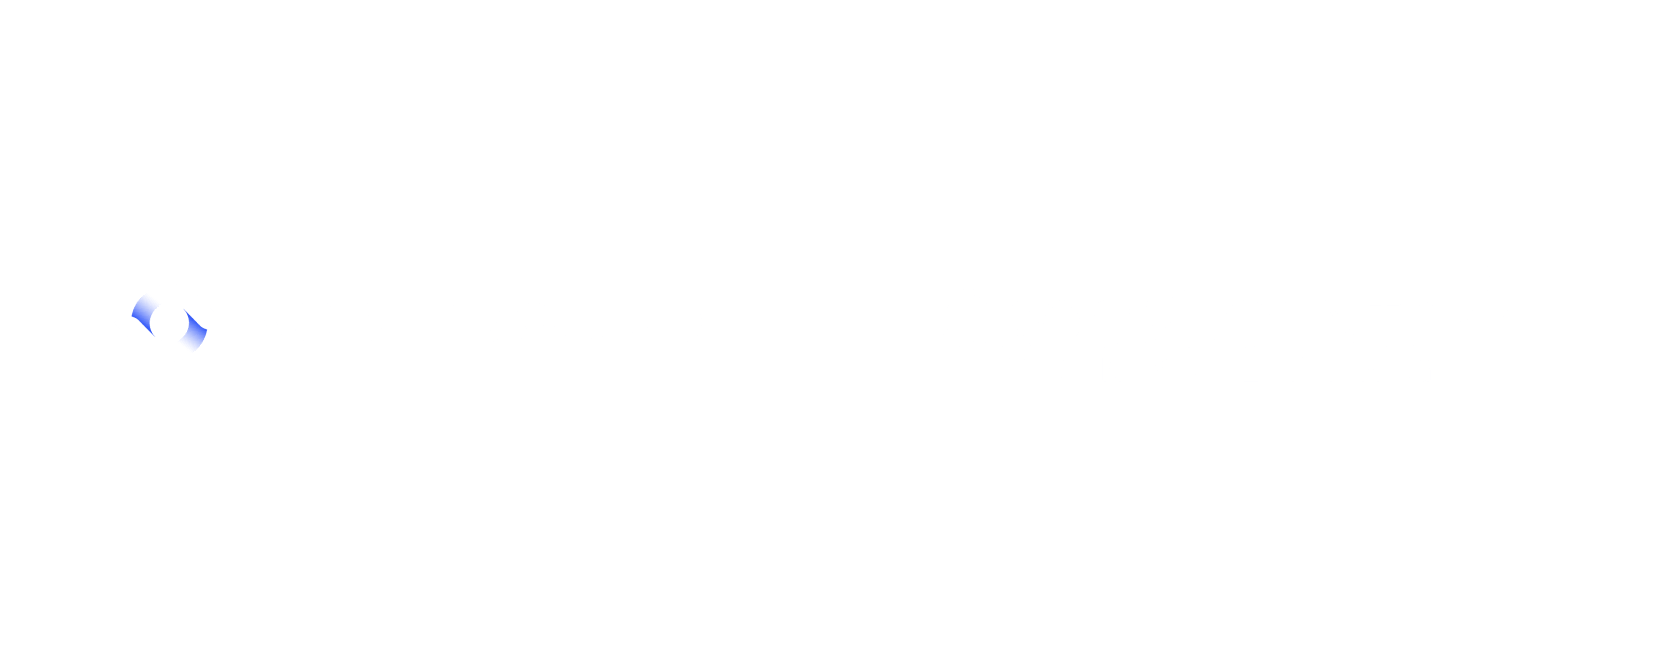 CrossCountry Consulting and AuditBoard Partner to Provide End-to-End Solution